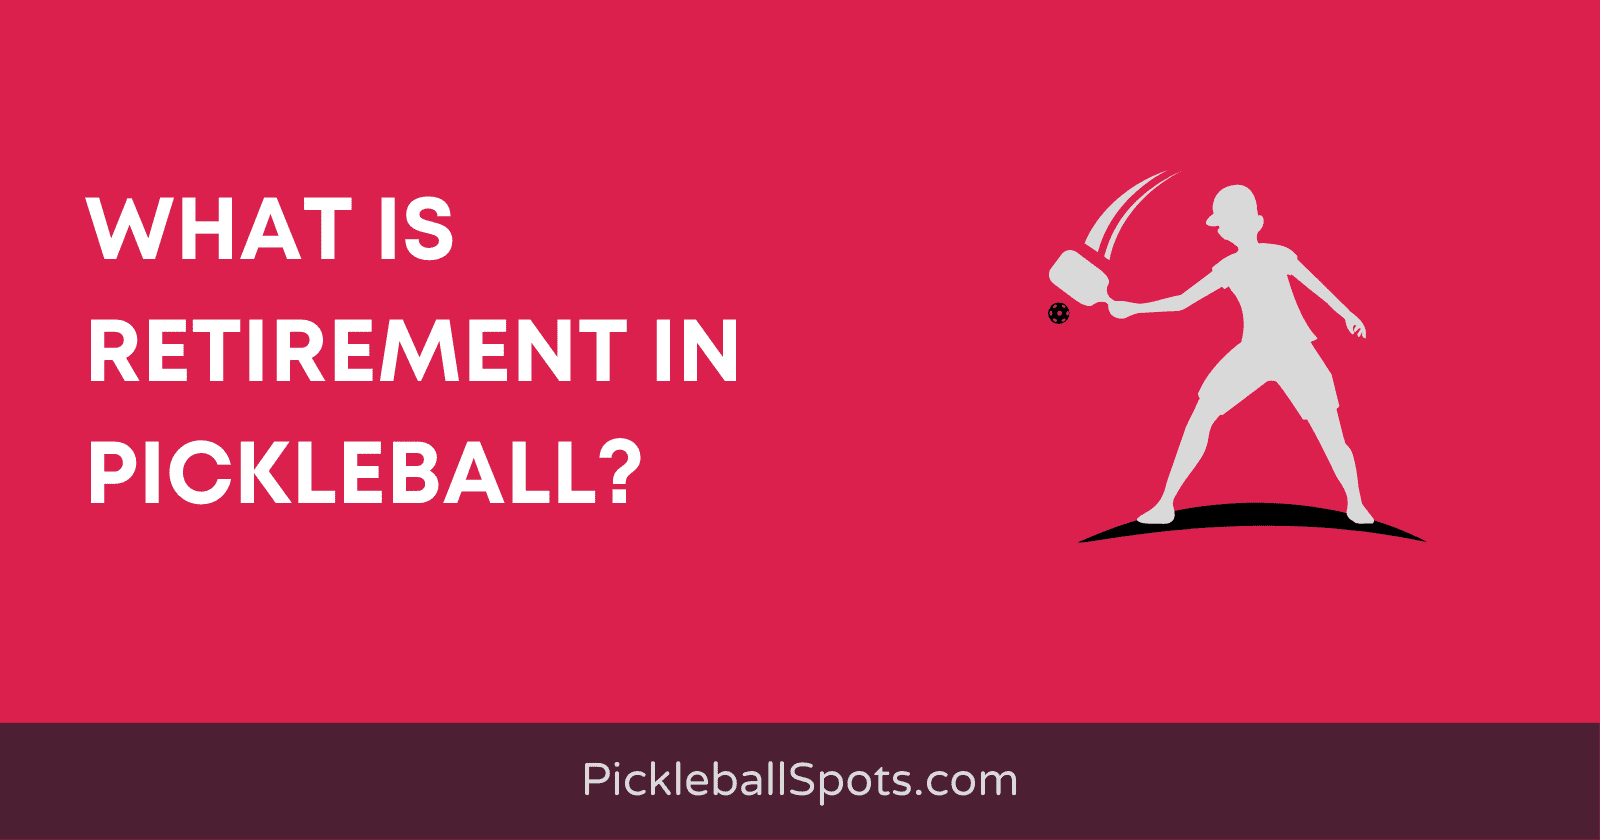 What Is Retirement In Pickleball